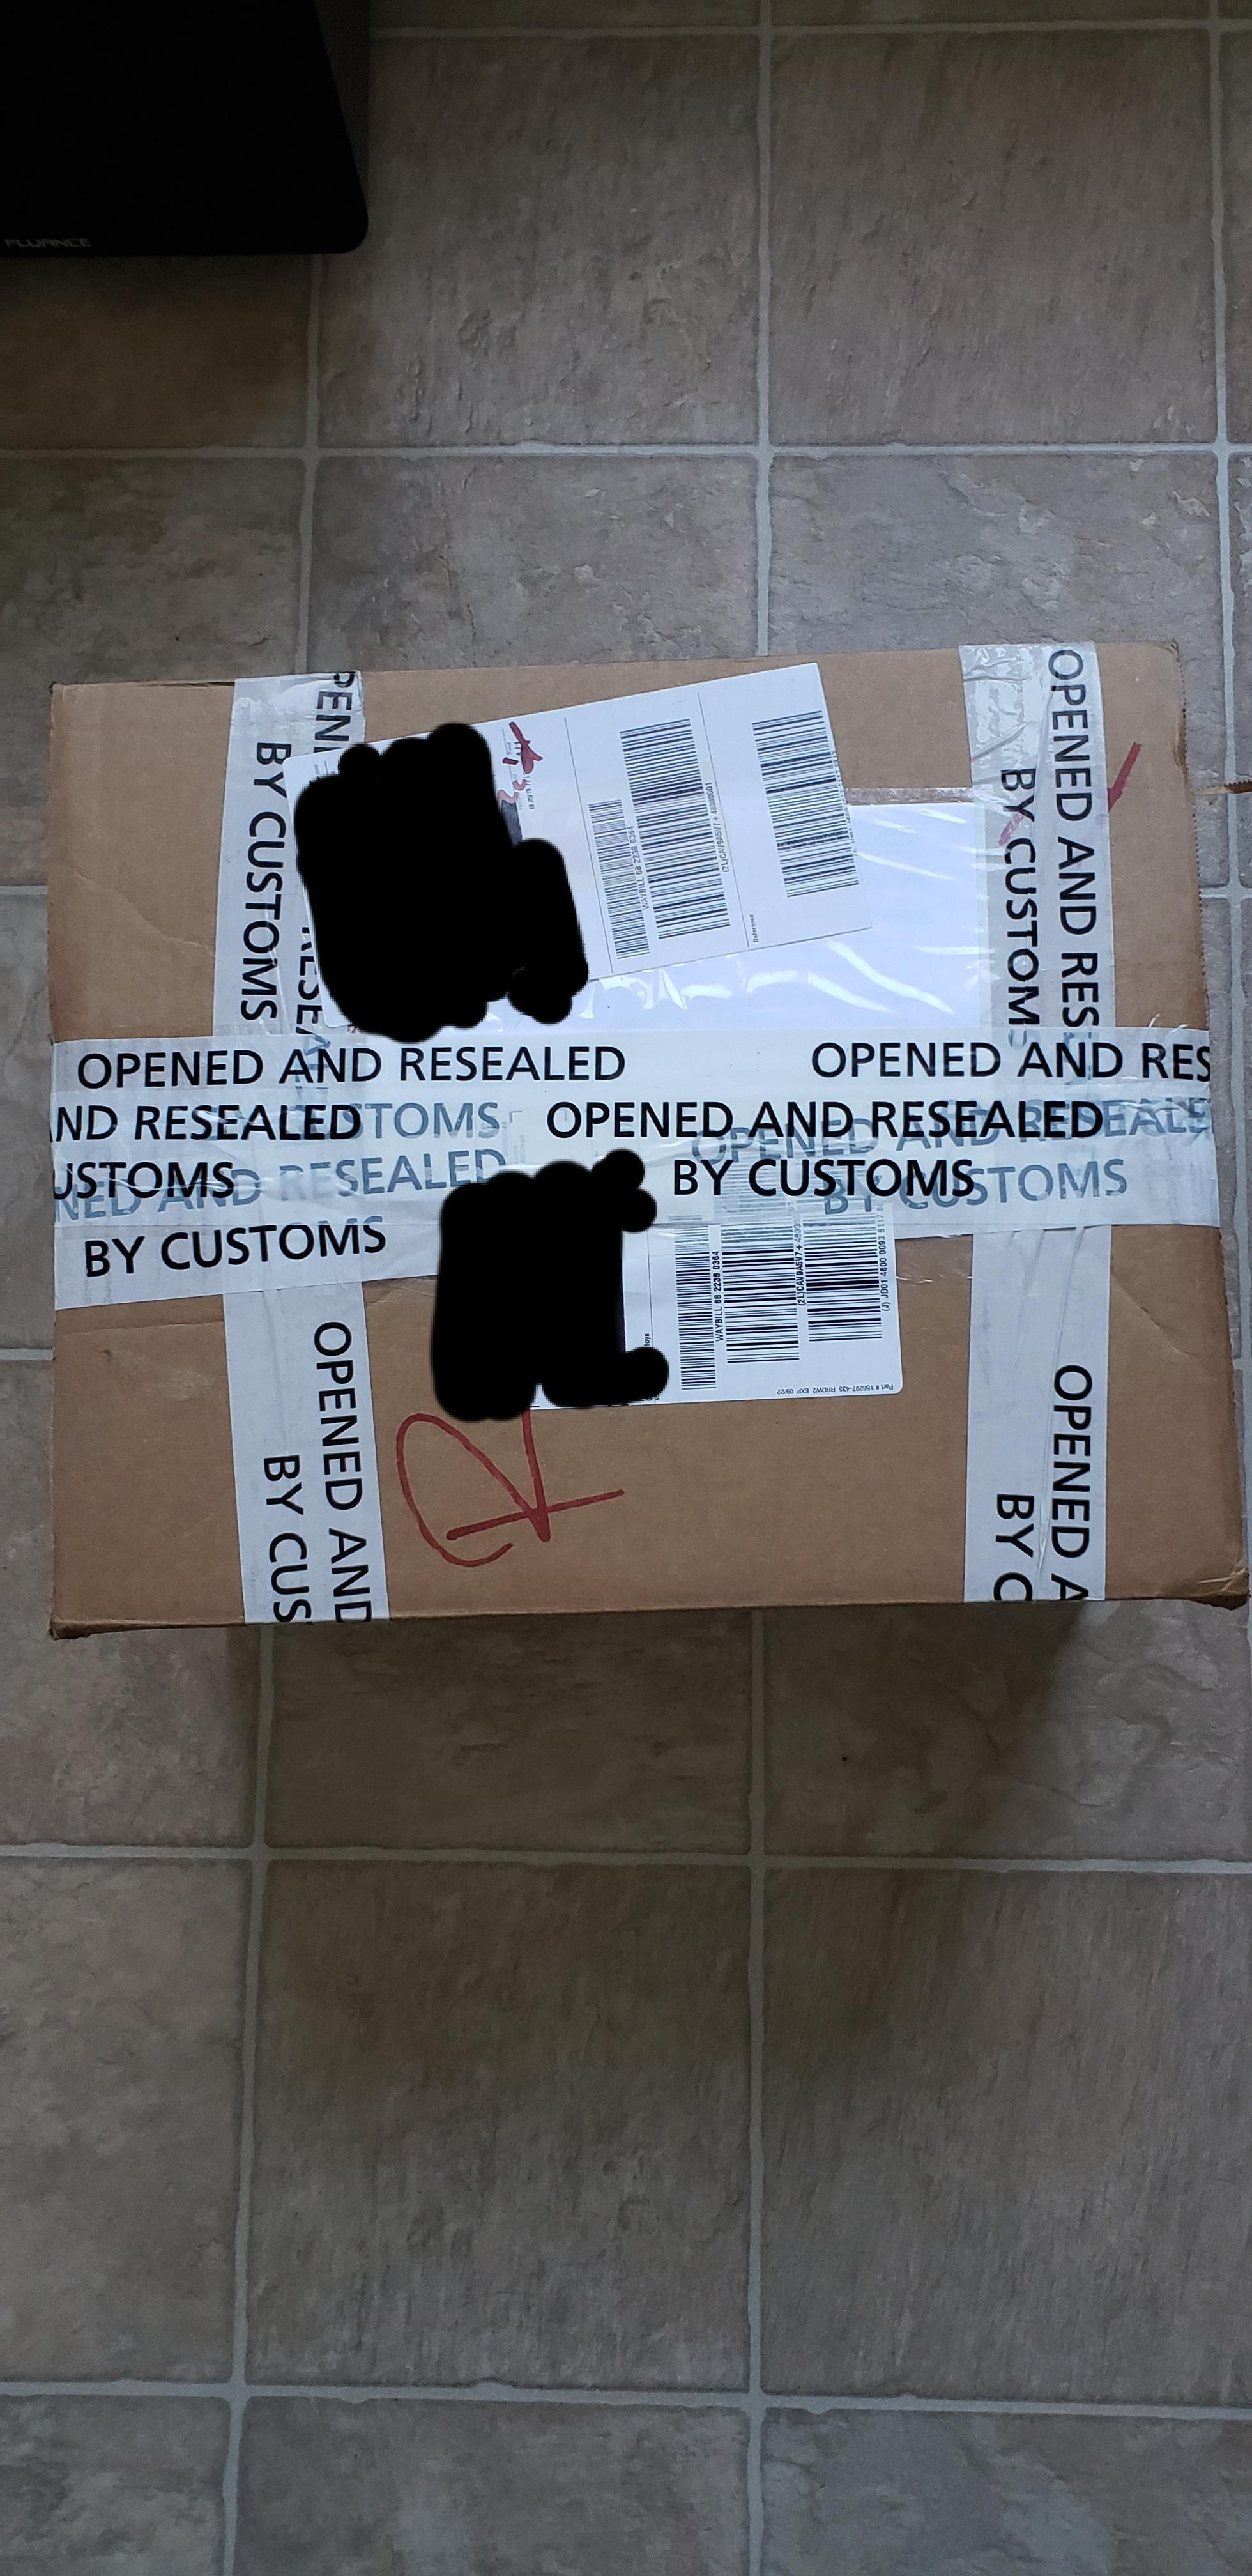 Just received a sex toy in the mail. Some poor soul at the customs office now knows how perverted I am.